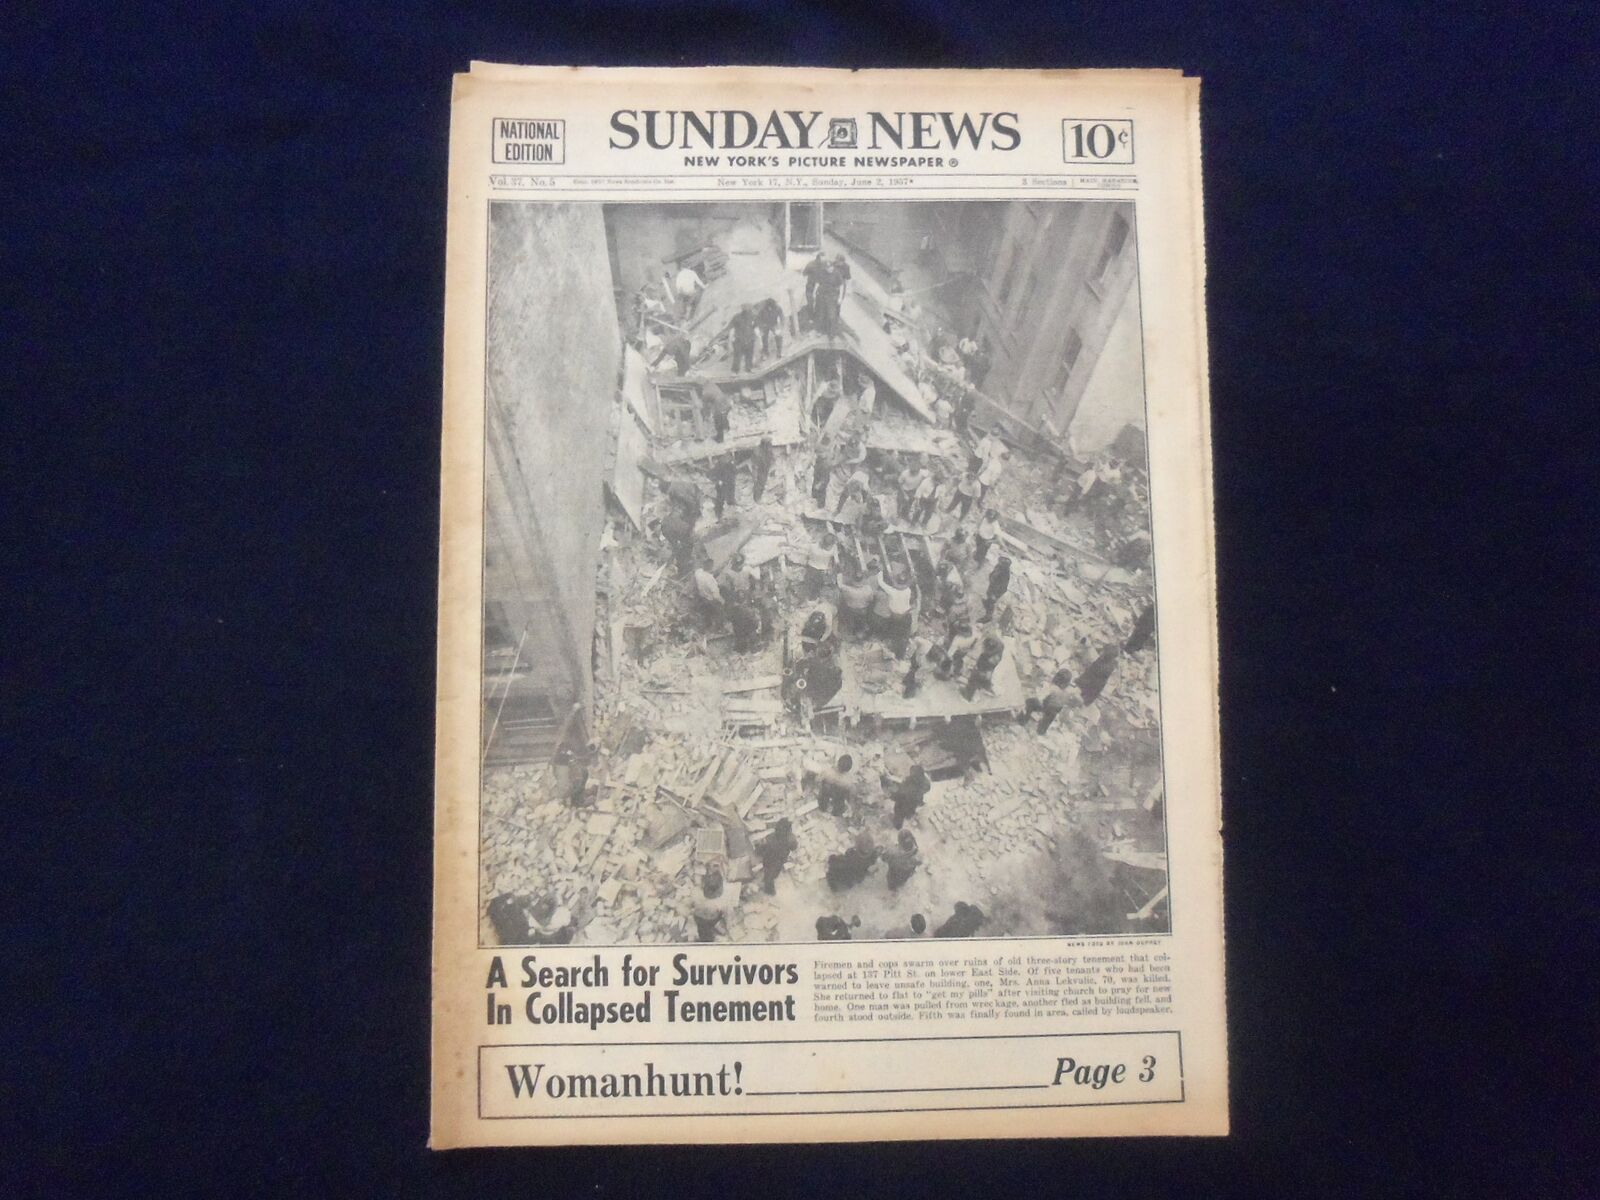 1957 JUNE 2 NEW YORK SUNDAY NEWS NEWSPAPER-EAST SIDE COLLAPSED TENEMENT- NP 6766